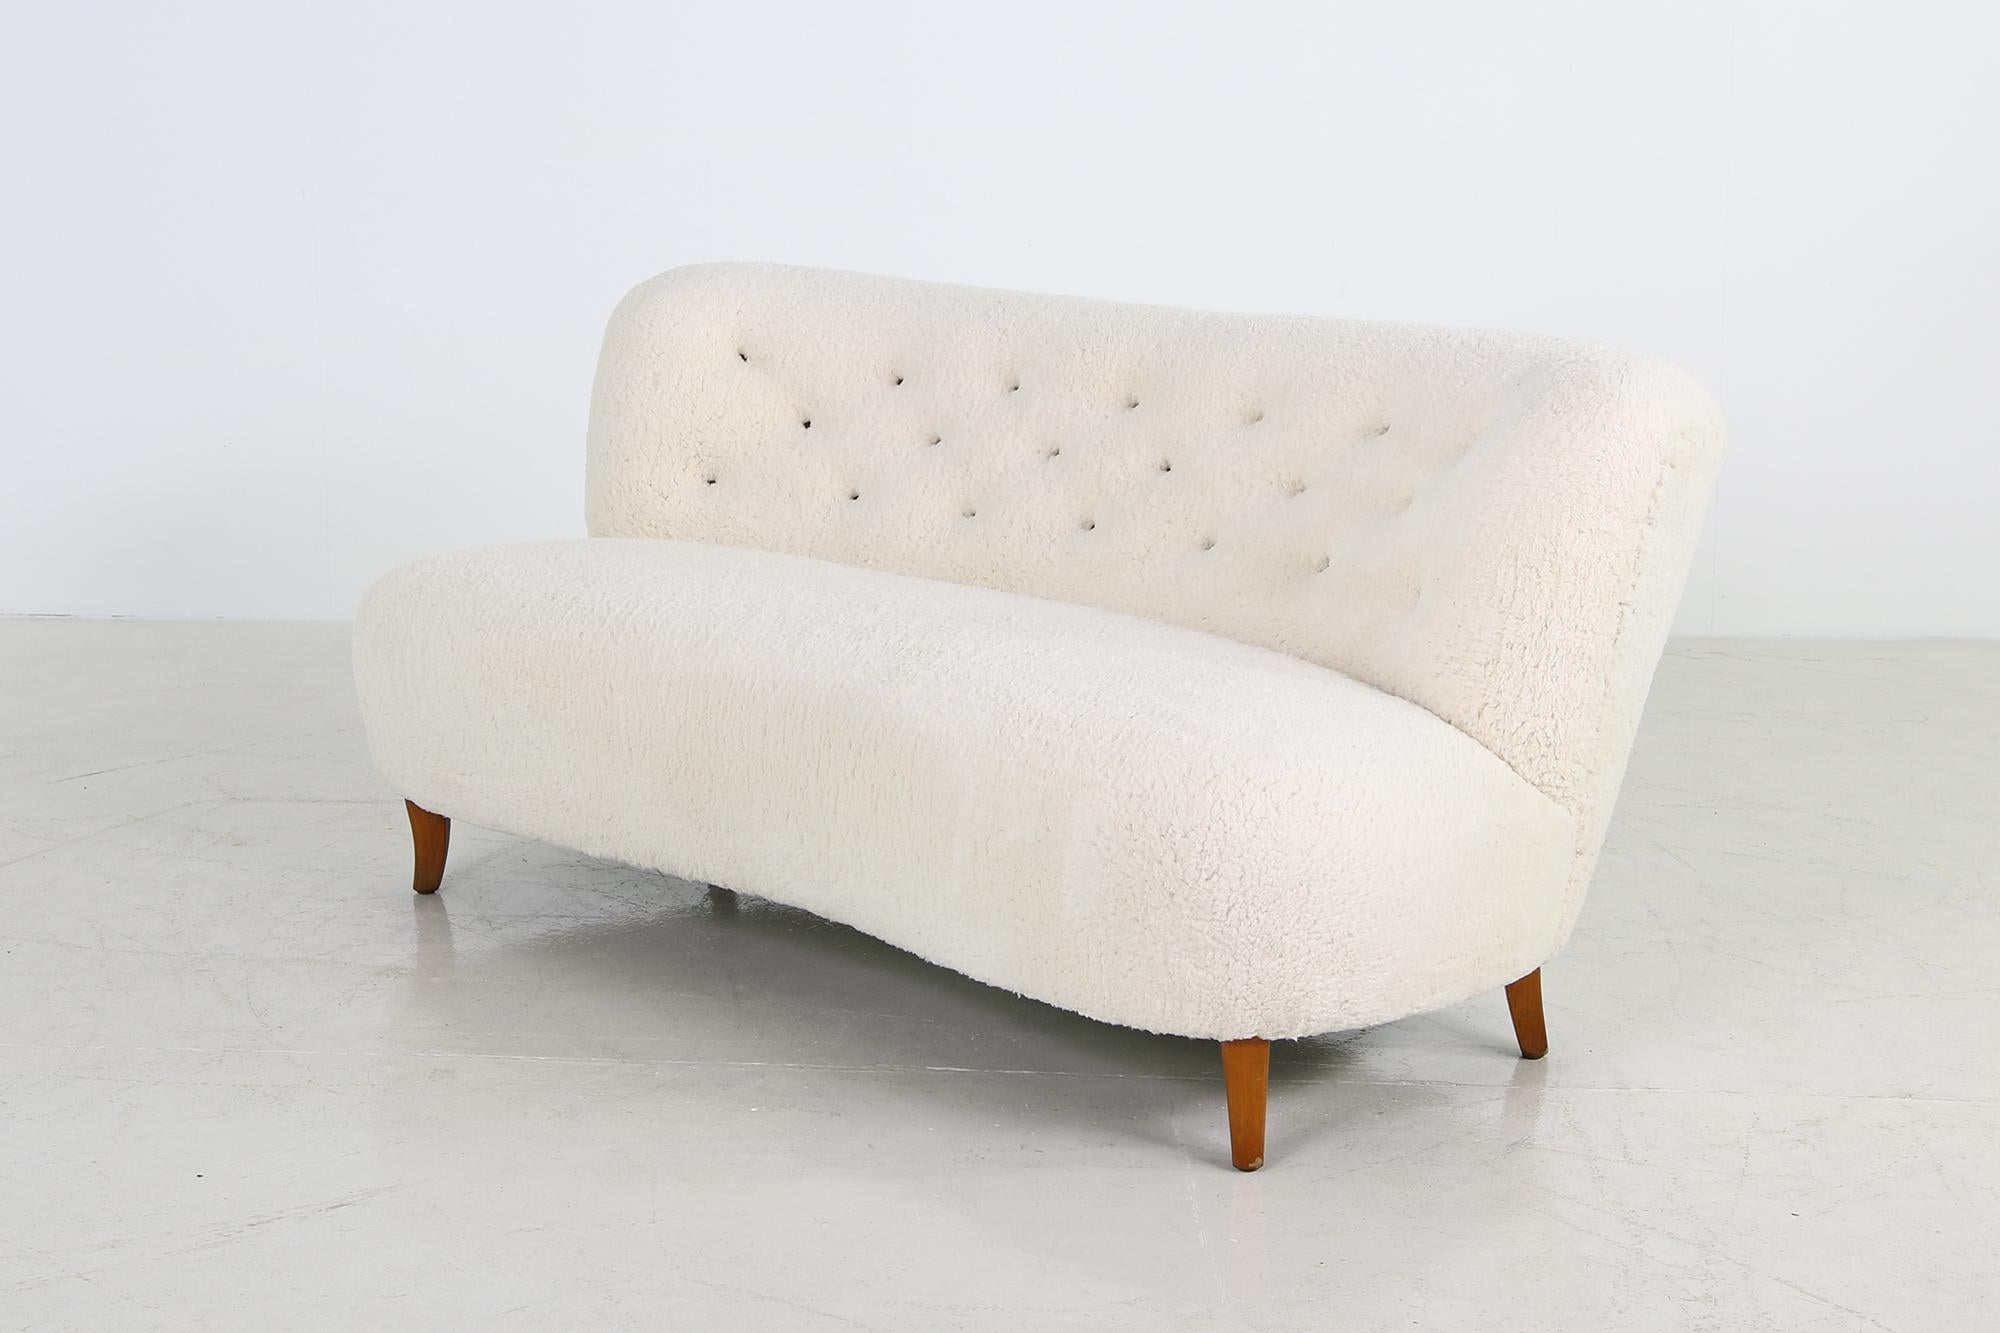 Beautiful 1950s lounge sofa, design attirb. to Gösta Jonsson, Jönköping Sweden, rare piece, stained and solid beechwood legs, new upholstery and covered with a super soft bright teddy faux fur fabric, very soft to the touch, tufted with beautiful